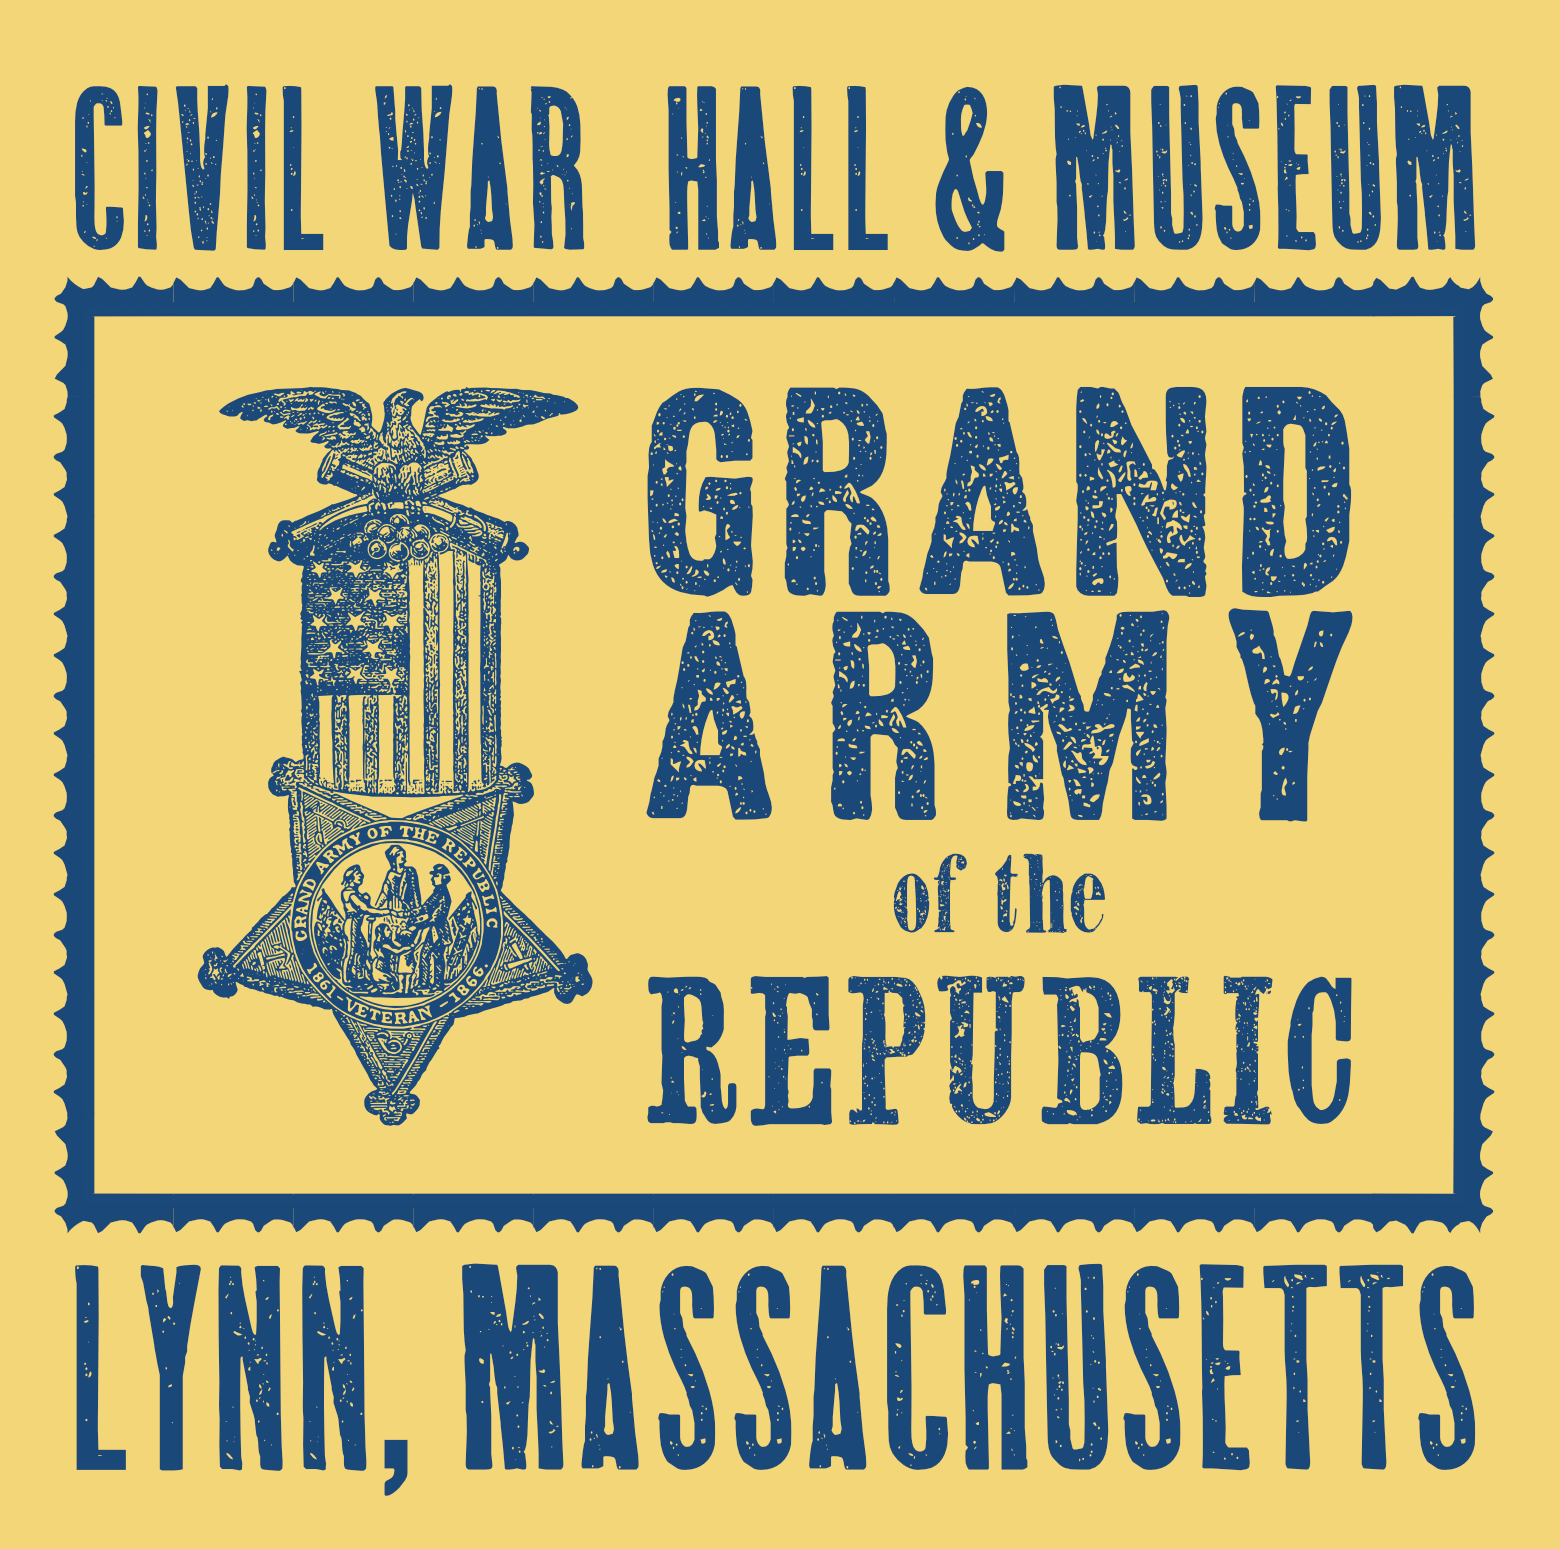 The Grand Army of the Republic Hall & Museum of Lynn, MA